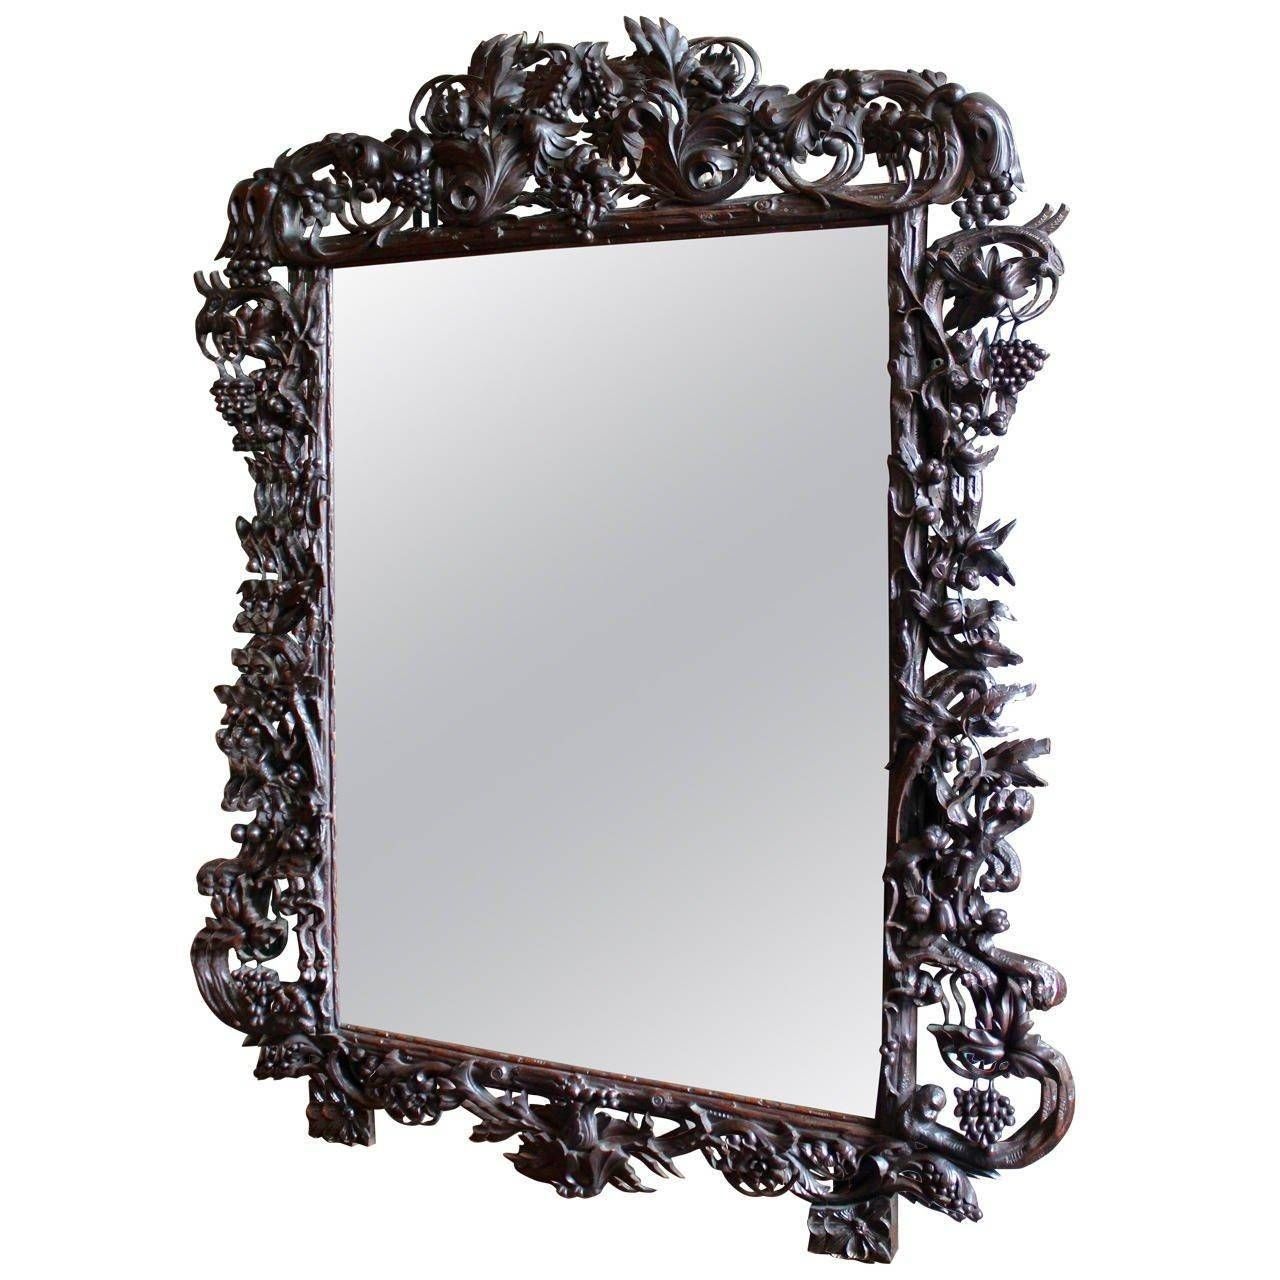 Mirror : Hollywood Regency Mirror Ornate Baroque Victorian The Pertaining To Baroque Black Mirrors (View 4 of 15)